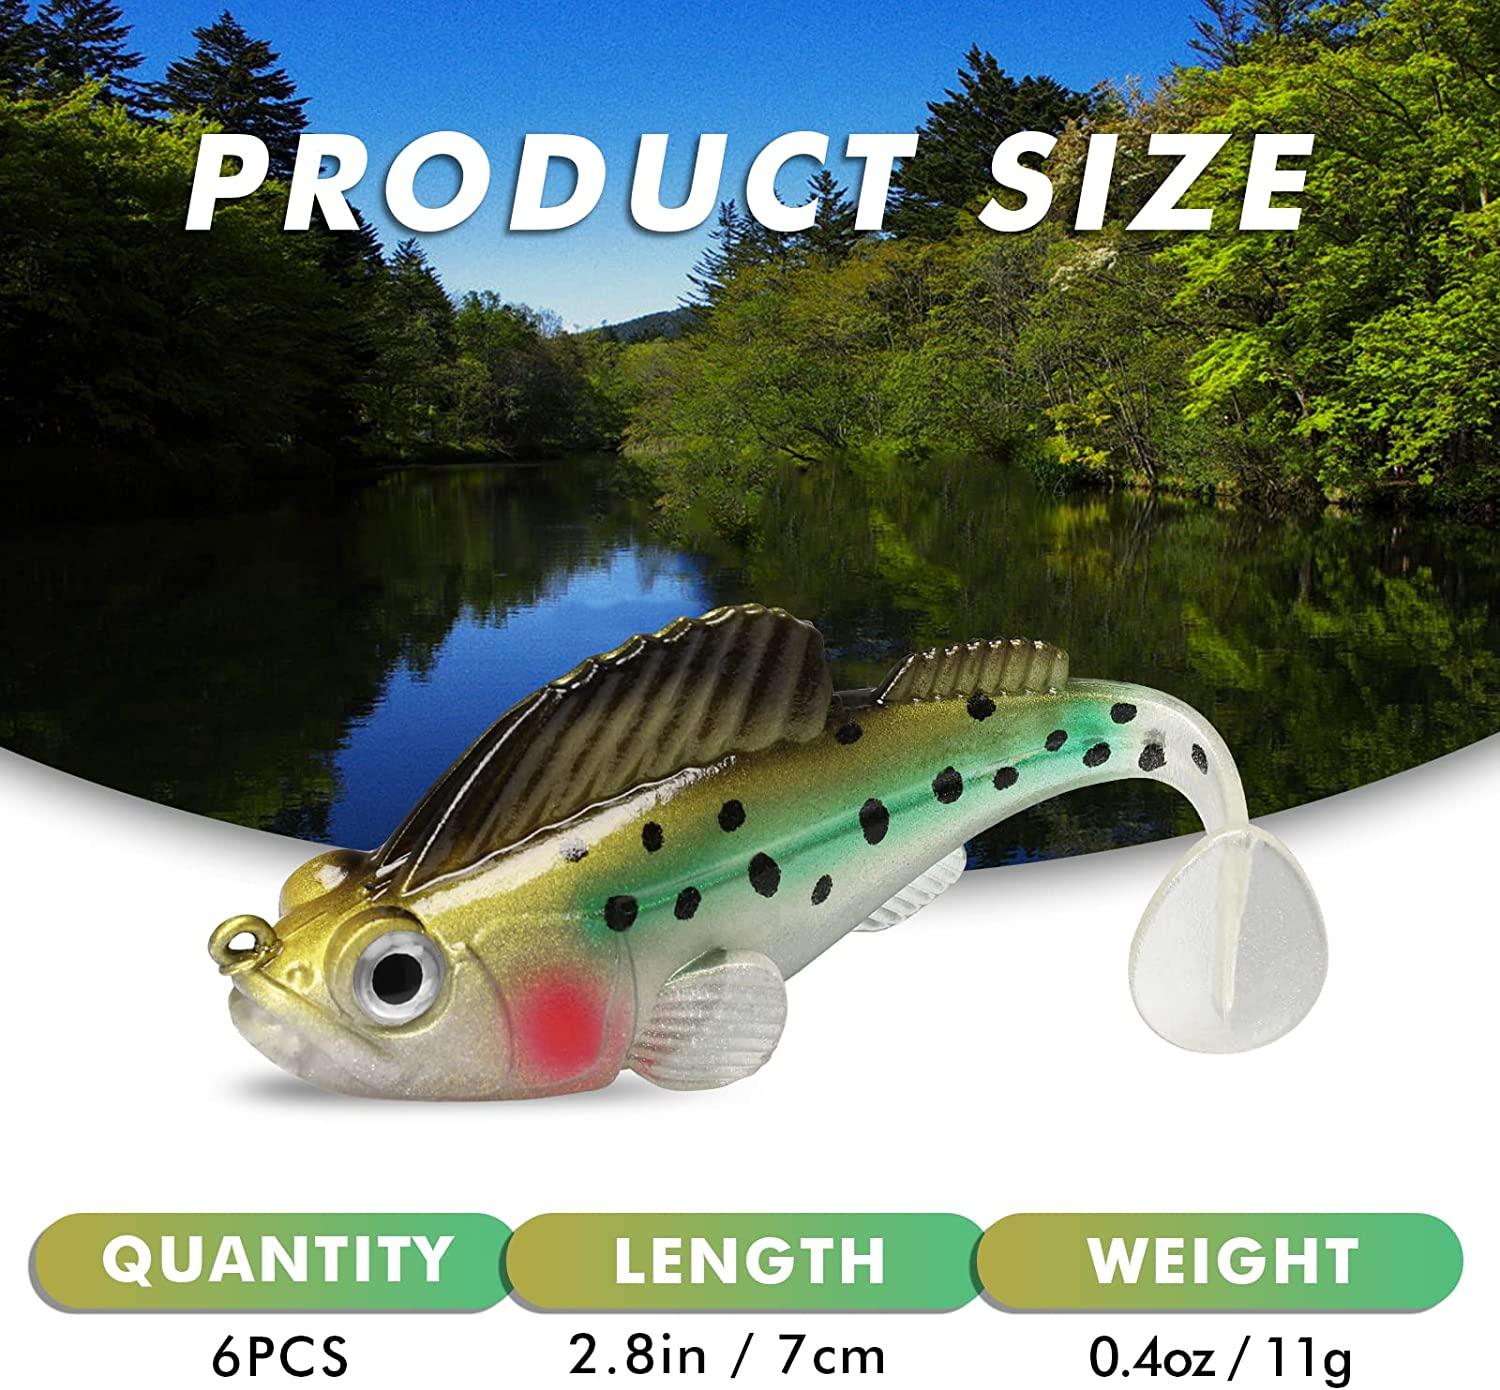 Goture Soft Fishing Lures Sea Fishing Lures for Bass Nigeria